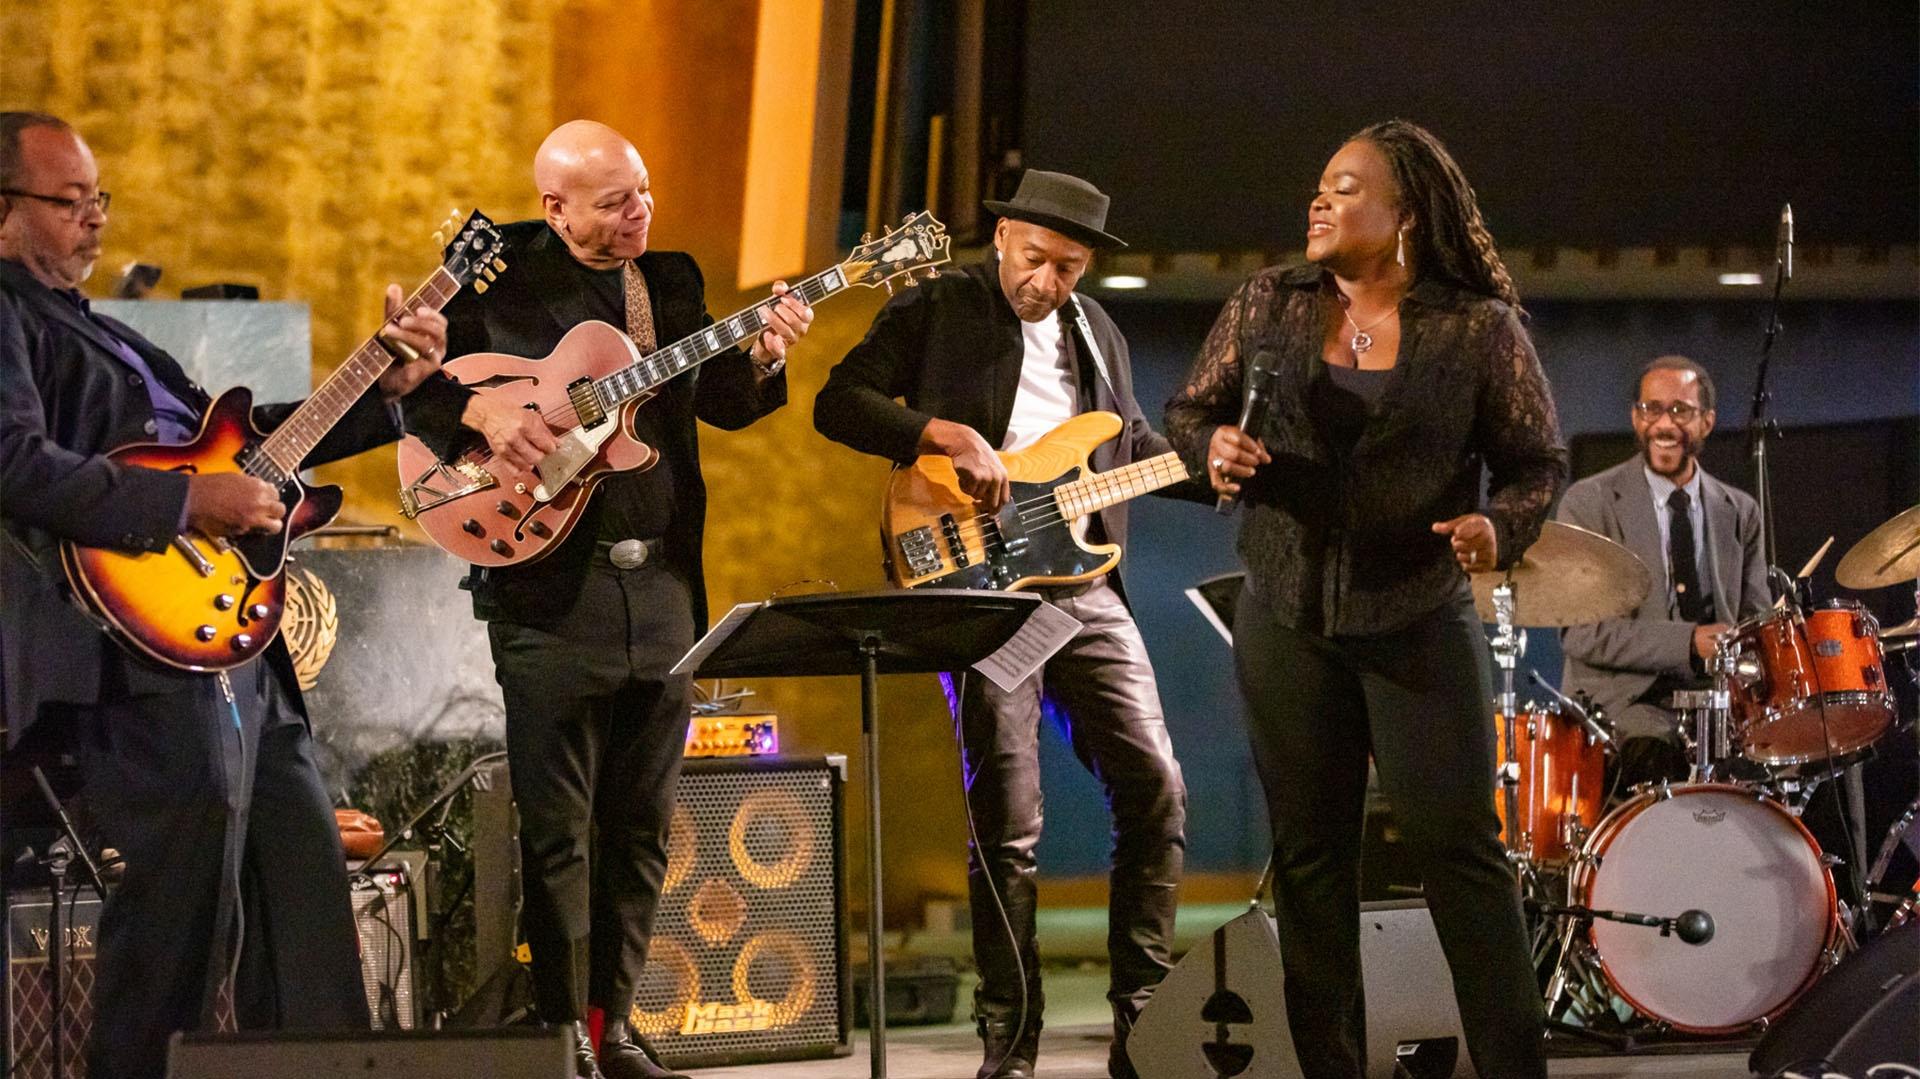 Image of Leonard Brown, Mark Whitfield, Marcus Miller, Shemekia Copeland, and Brian Blade performing